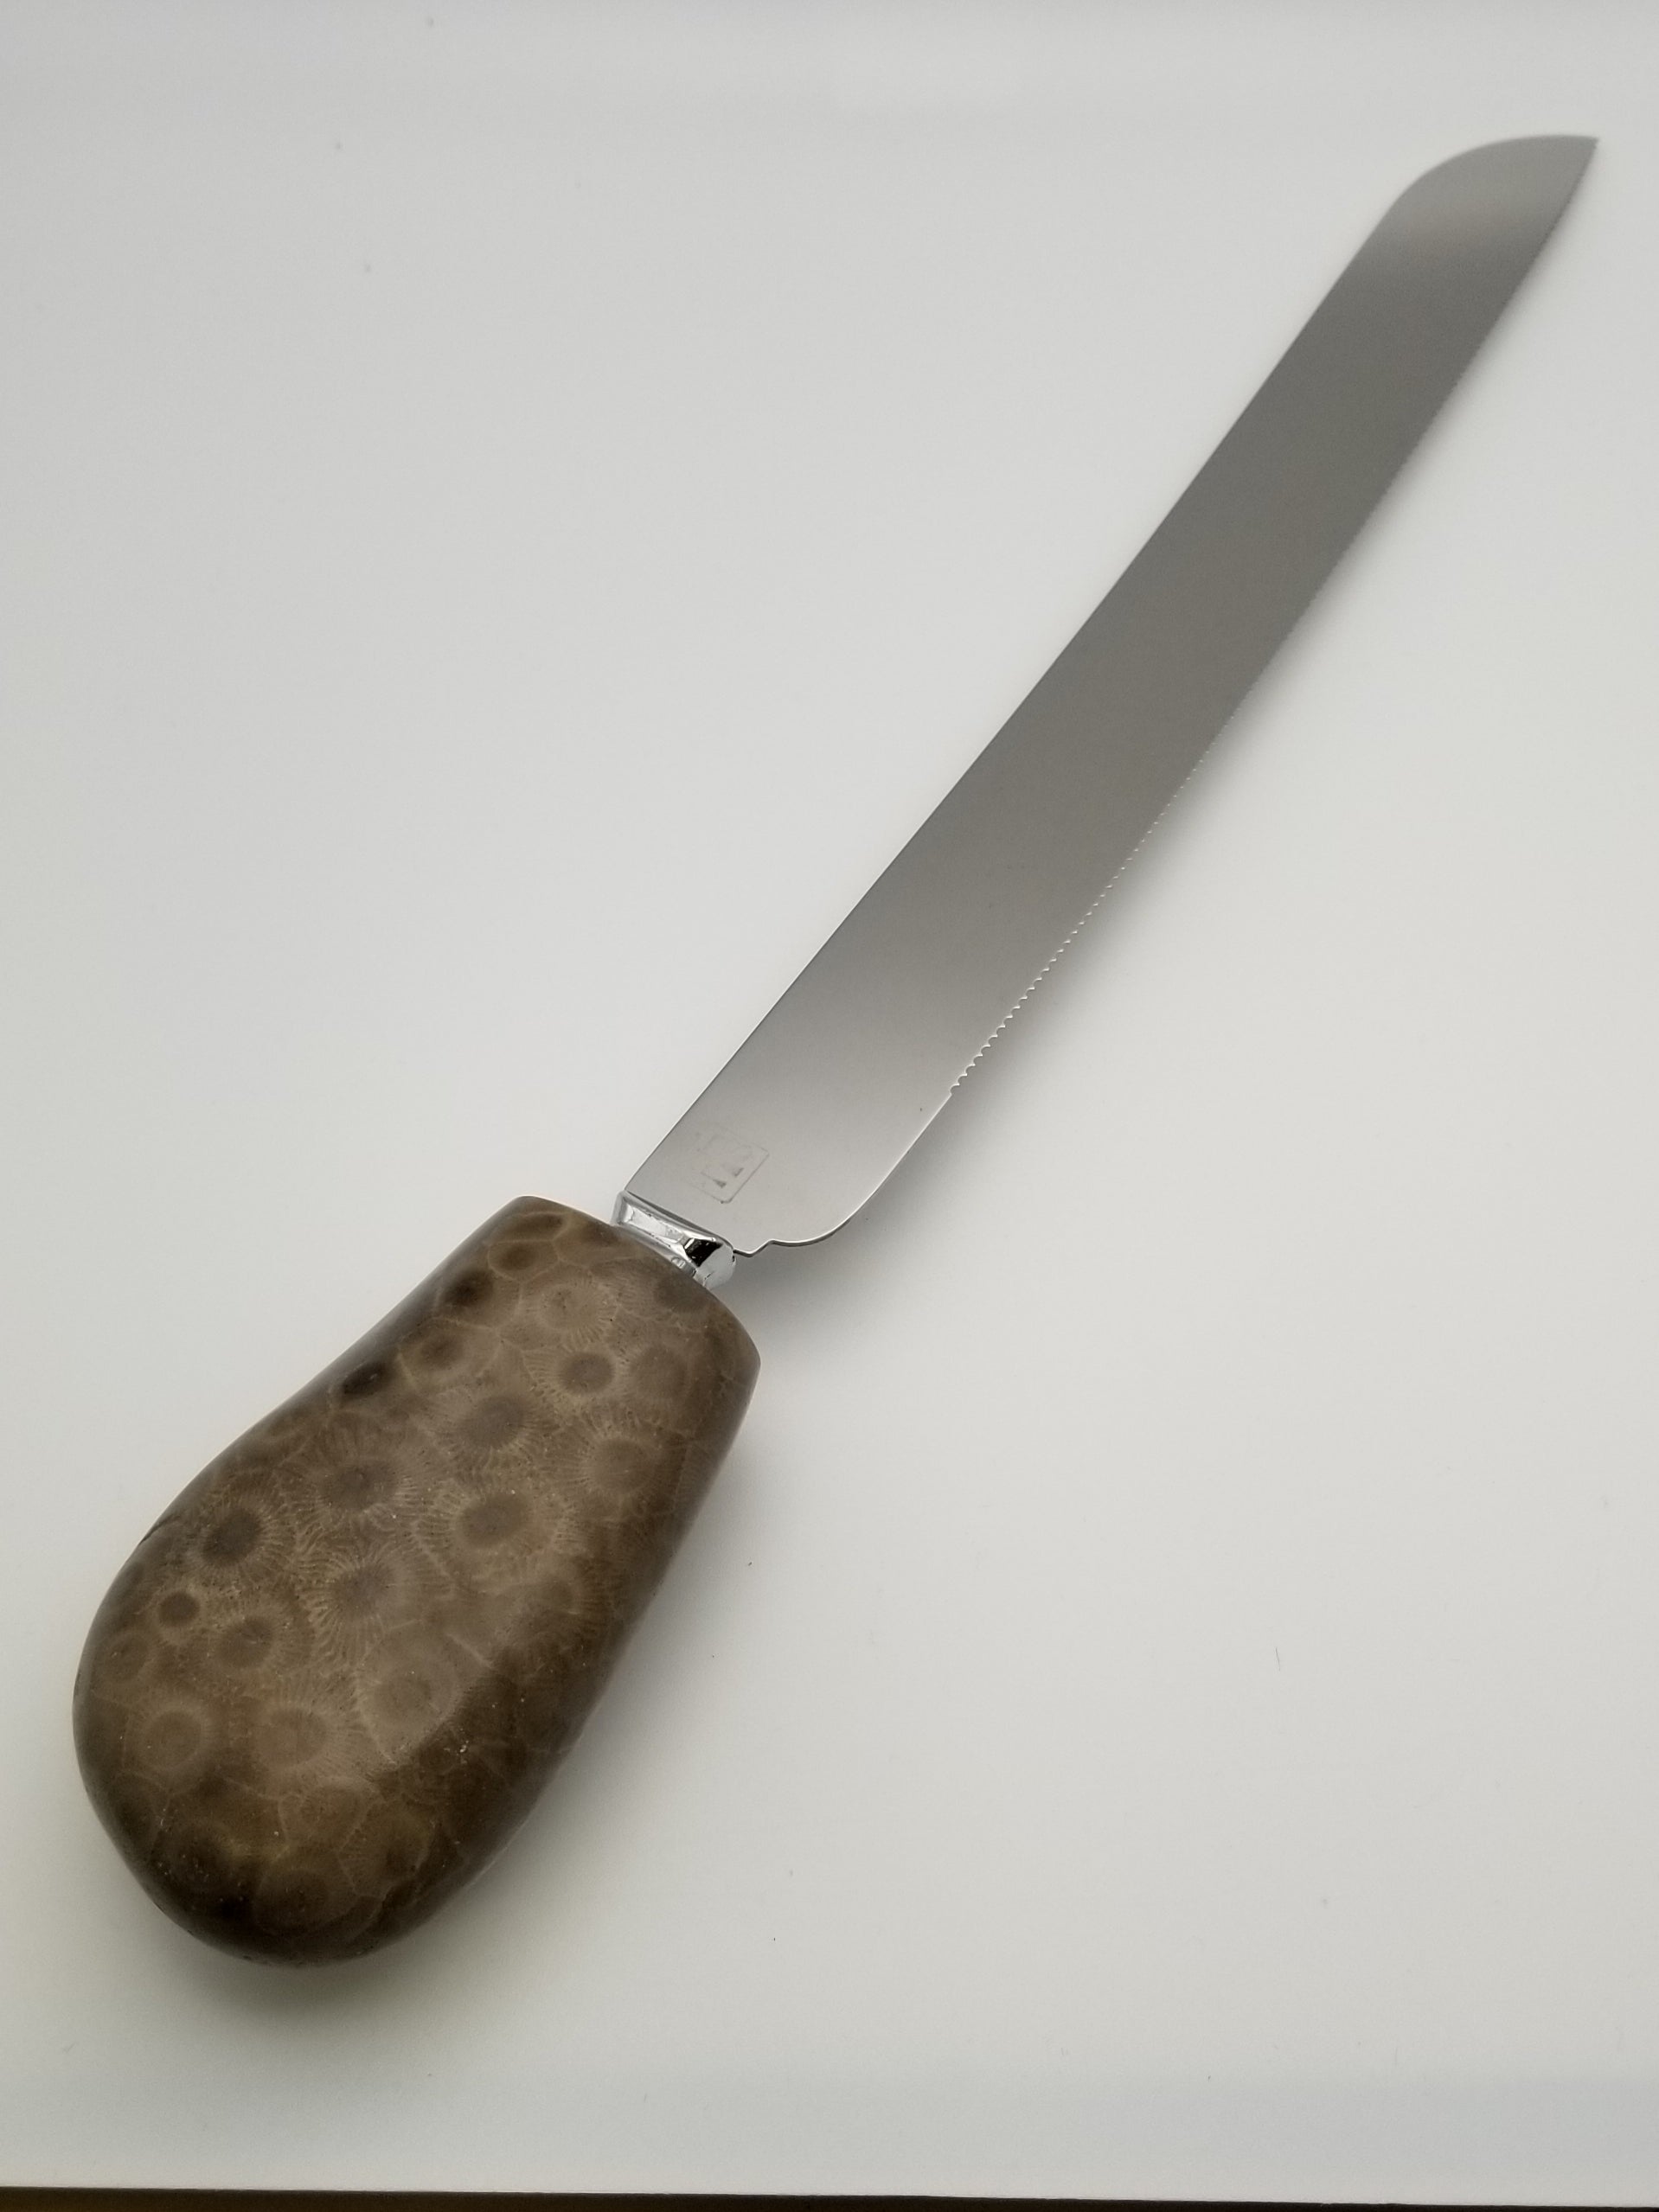 Serrated stainless steel kitchen knife with petoskey stone handle. Fully polished Petoskey stone handle.